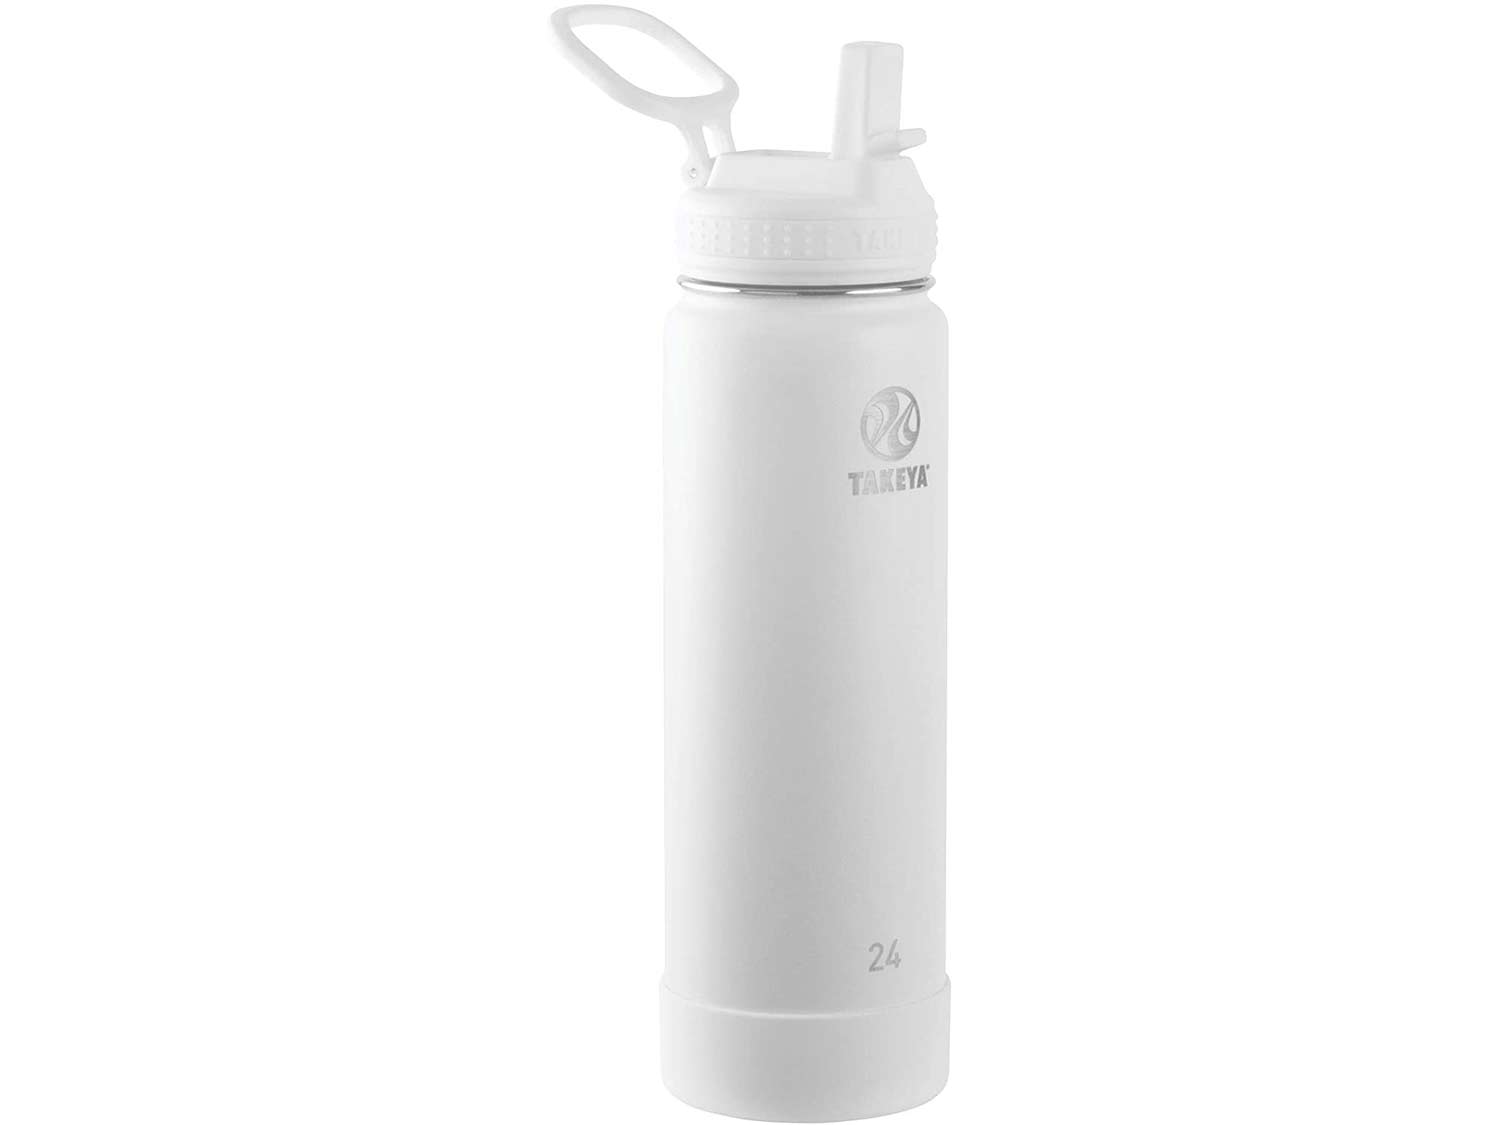 Takeya 24oz Actives Insulated Stainless Steel Water Bottle with Straw Lid -  White